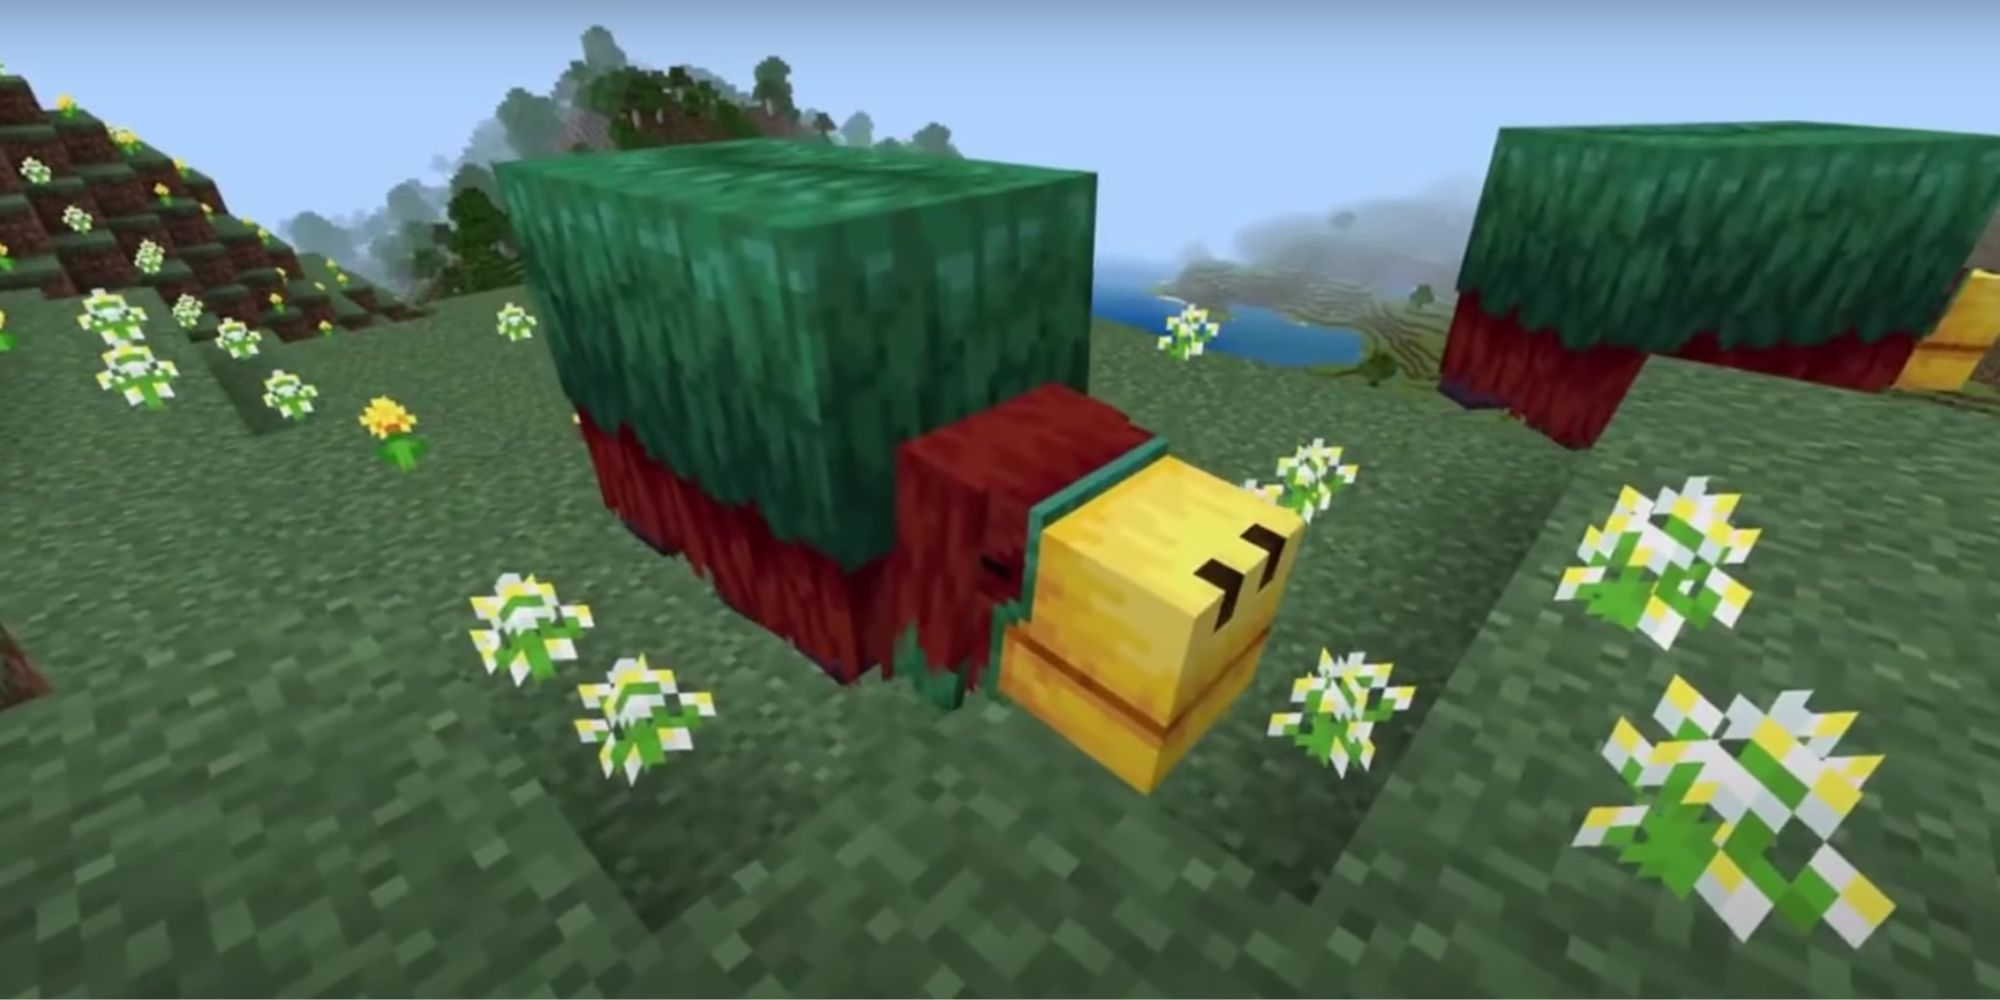 An in-game look at Minecraft's Sniffer mob.